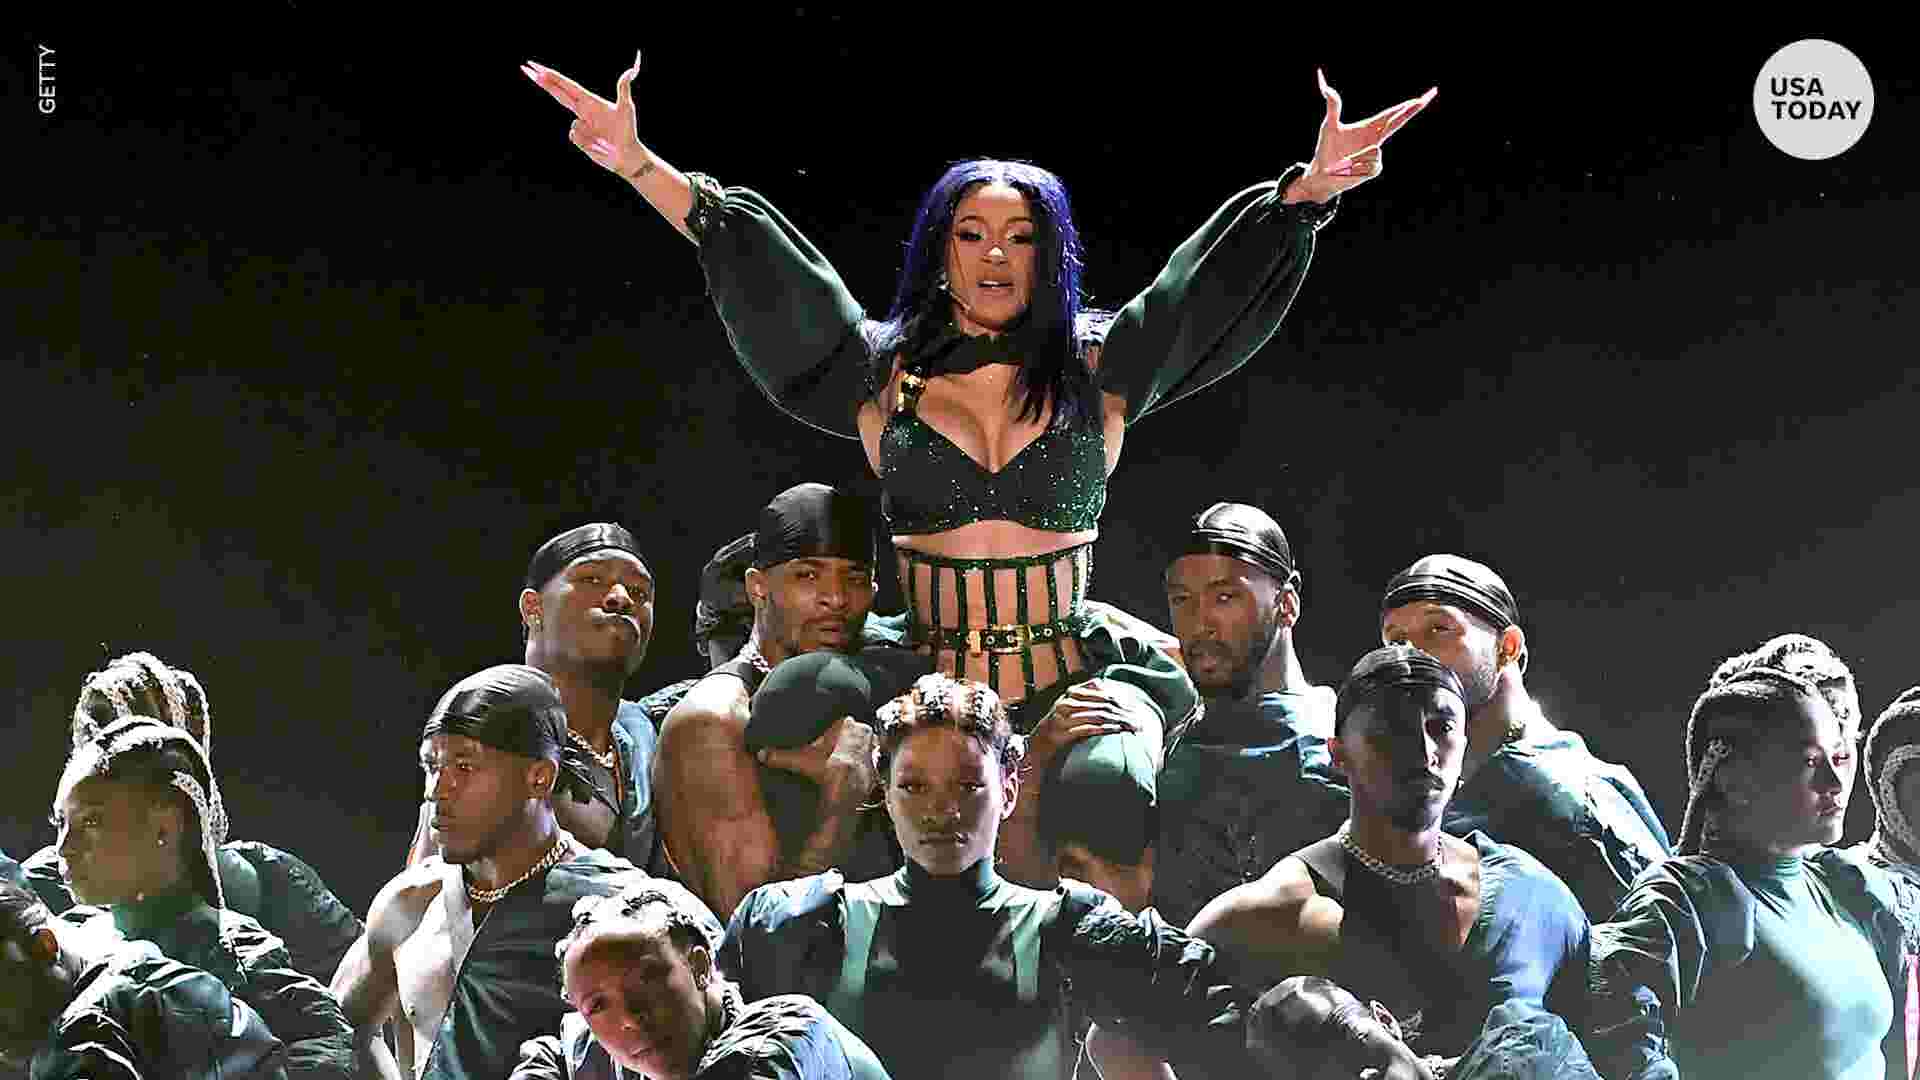 2019 Bet Awards Cardi B Opens The Show With A Lap Dance